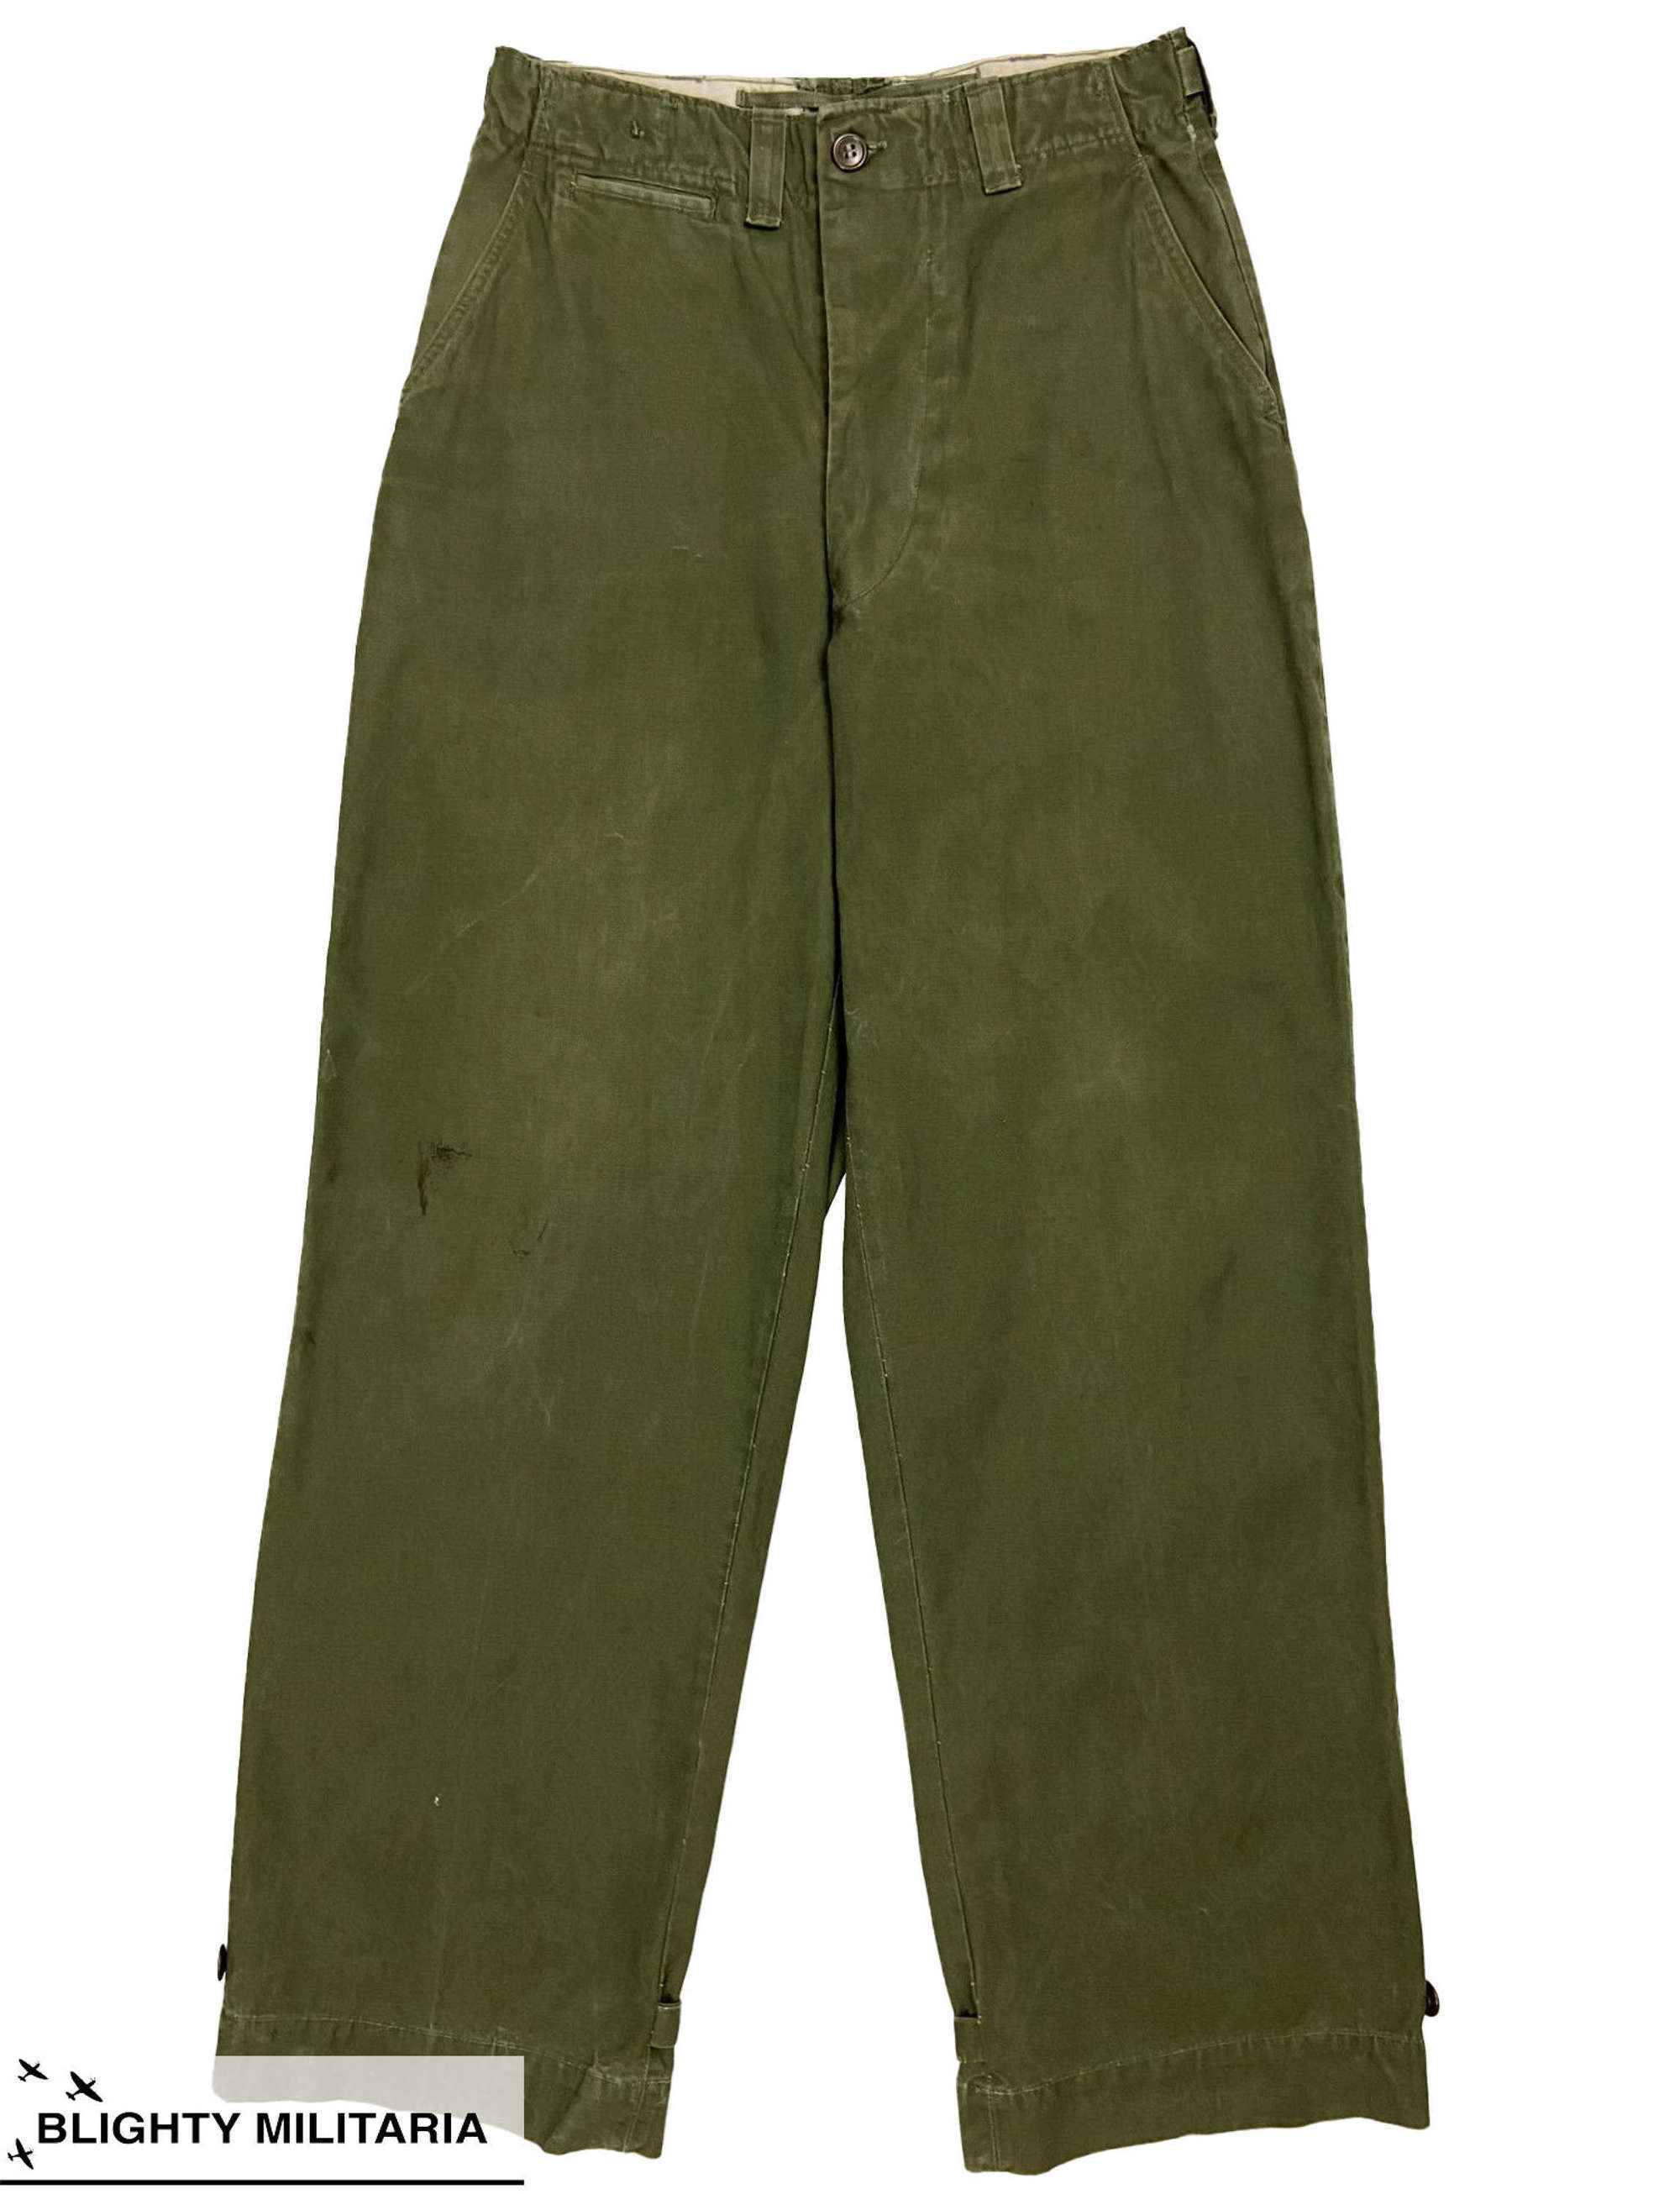 Original 1951 Dated US Army M43 Combat Trousers - Size 30x32